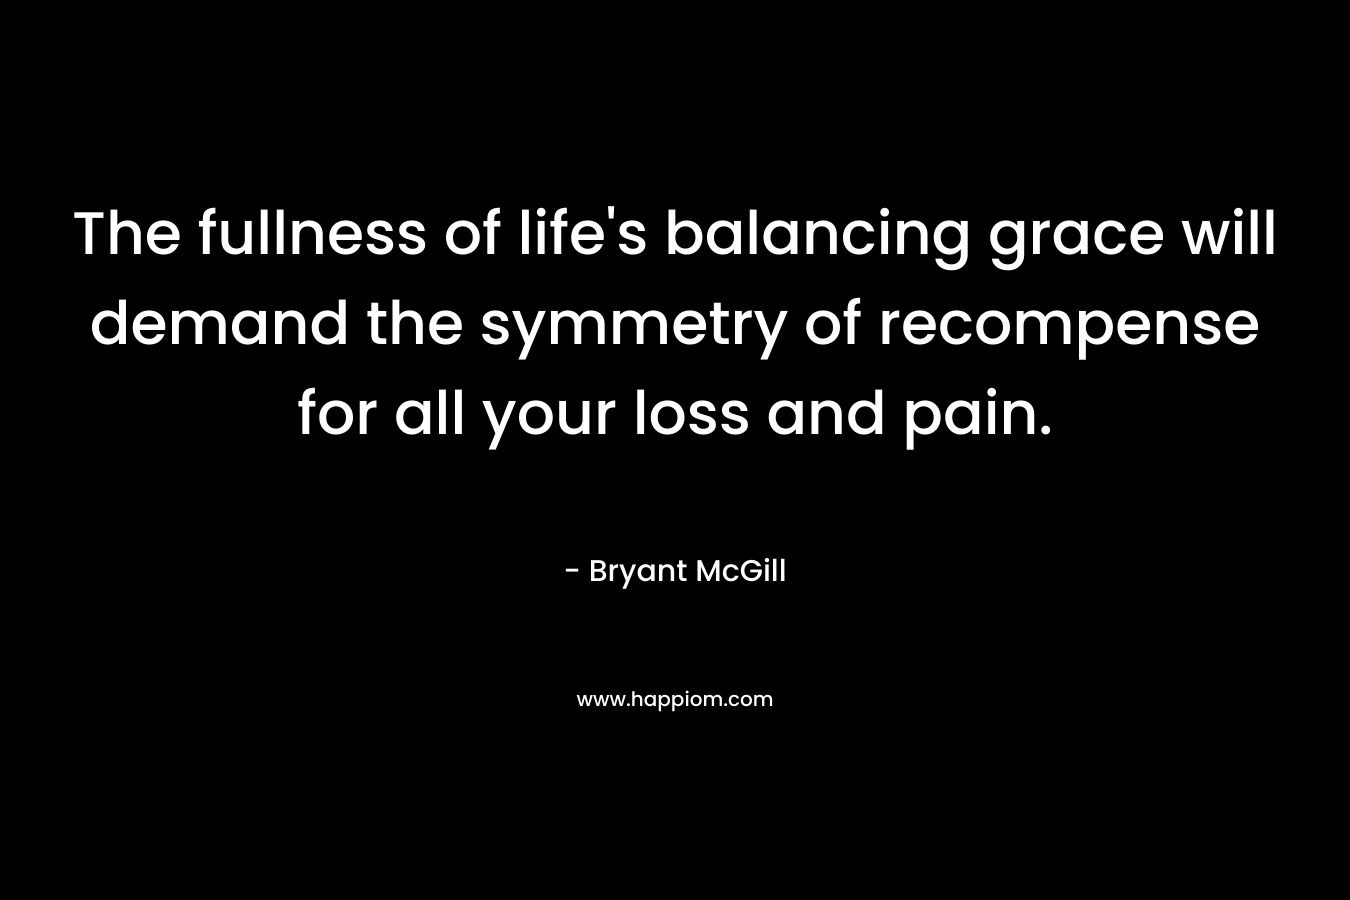 The fullness of life's balancing grace will demand the symmetry of recompense for all your loss and pain.